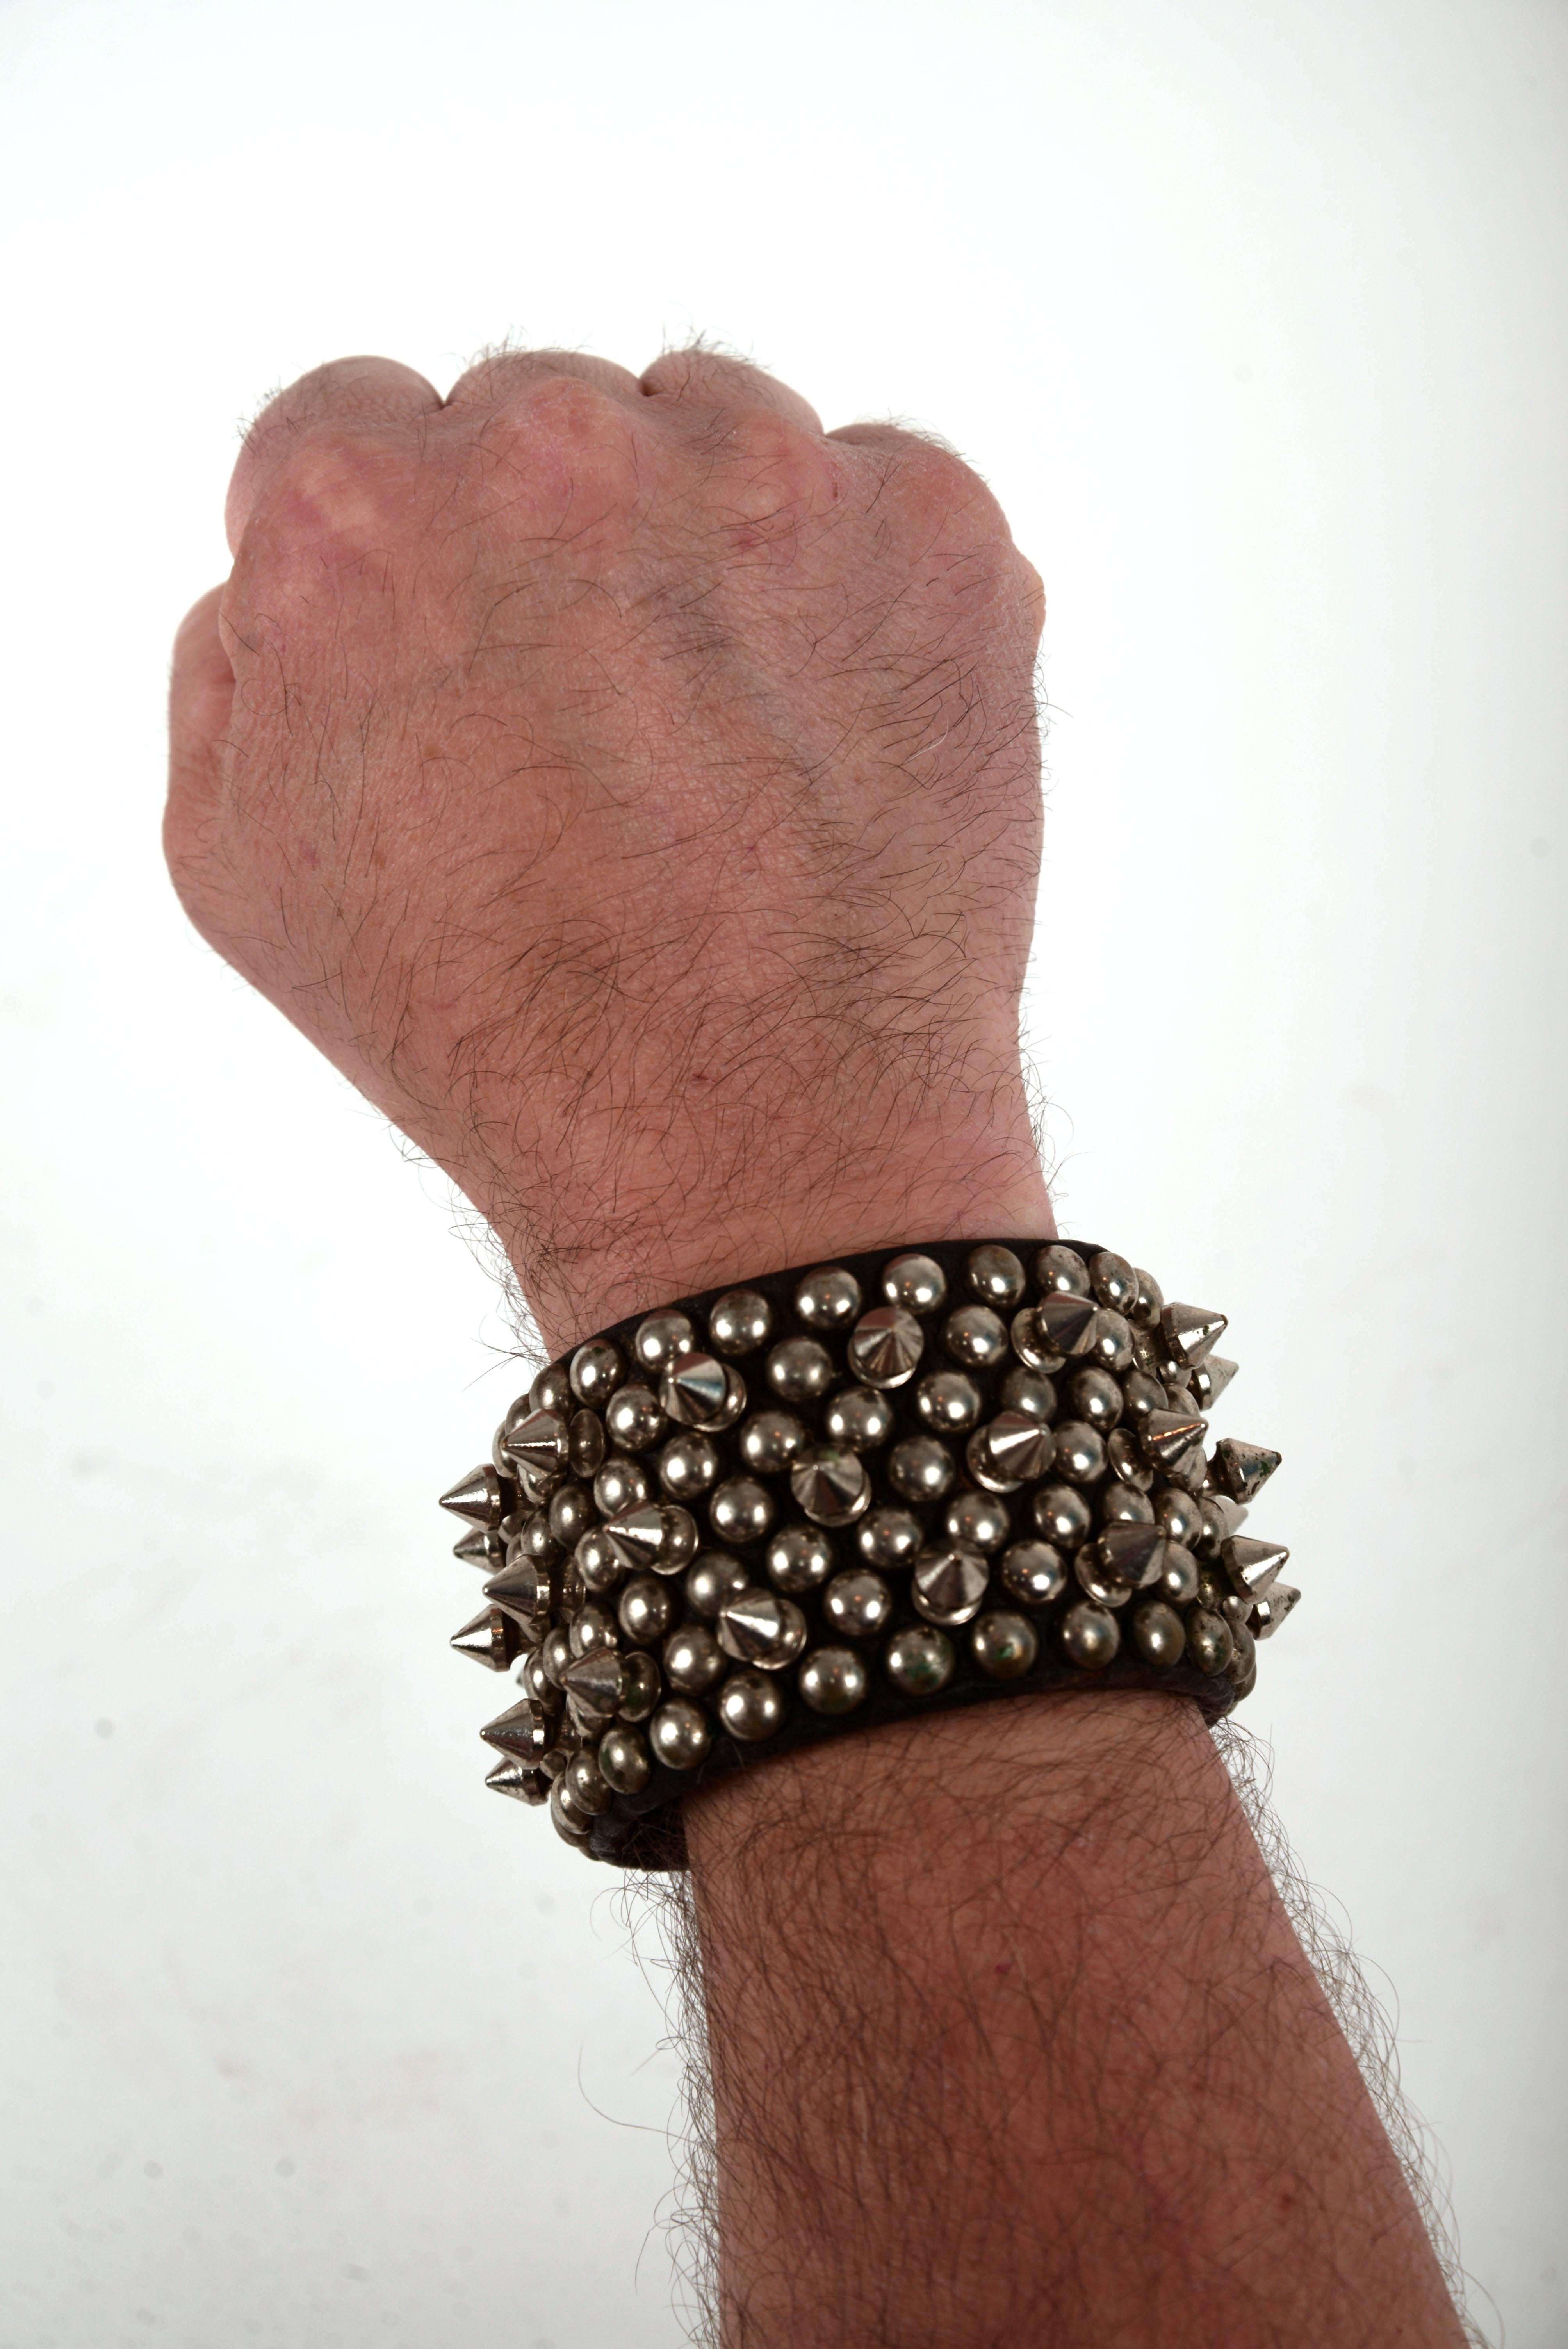 Collection of four handcrafted leather spike/studded accessories for the neck and wrist.